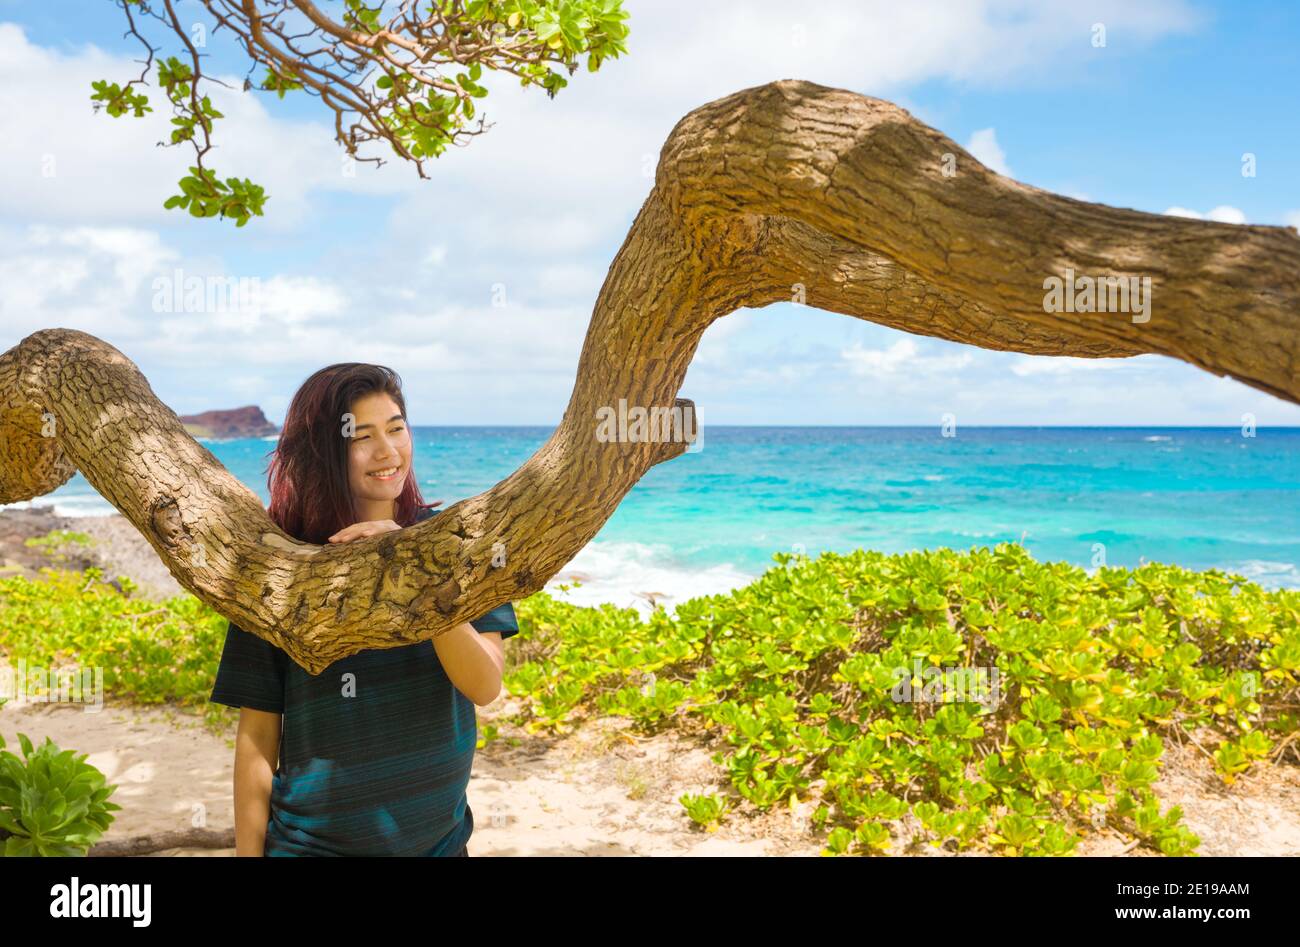 Biracial teen girl relaxing on a bench by Makapu'u beach on Oahu, Hawaii, under a gnarly shade tree looking out towards blue ocean view Stock Photo